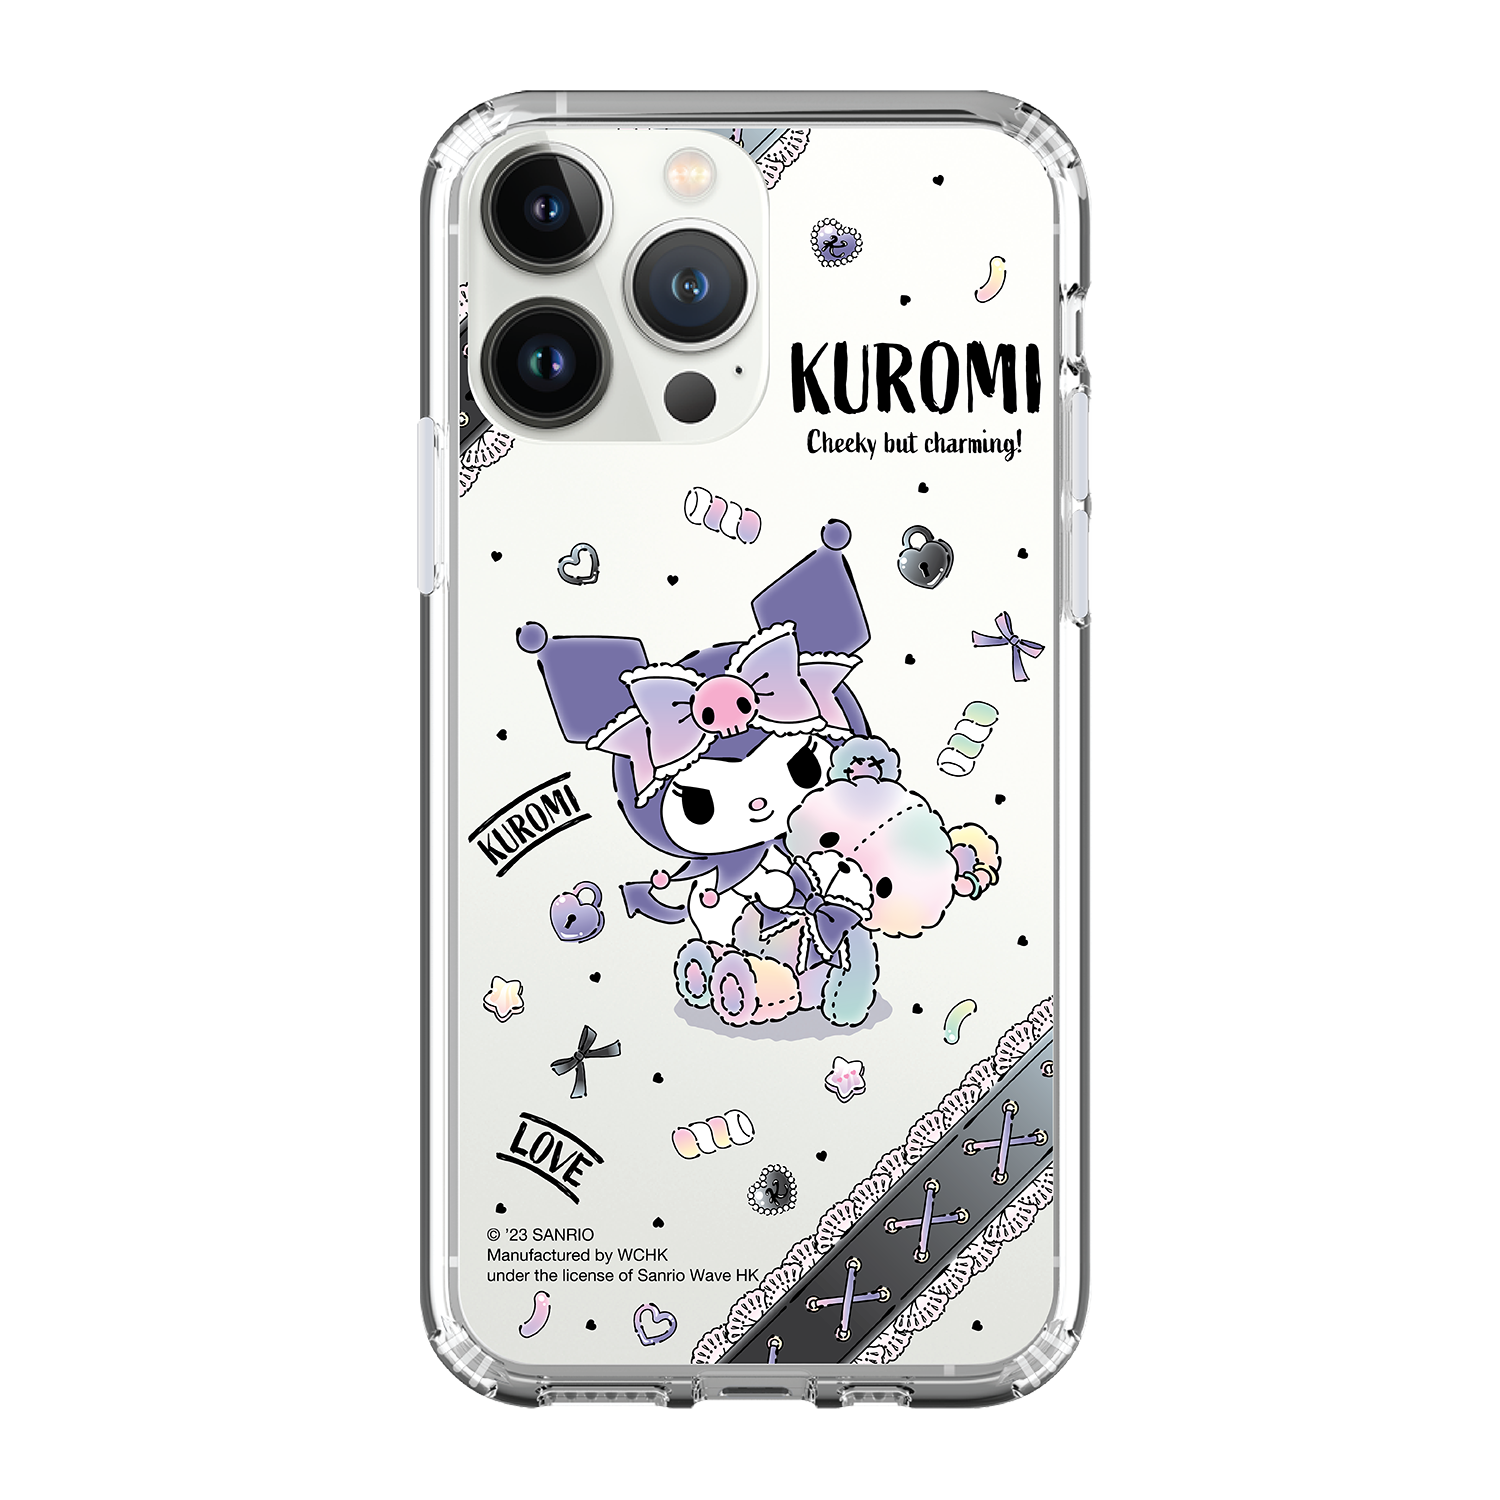 Kuromi Clear Case / iPhone Case / Android Case / Samsung Case 防撞透明手機殼 (KU105)